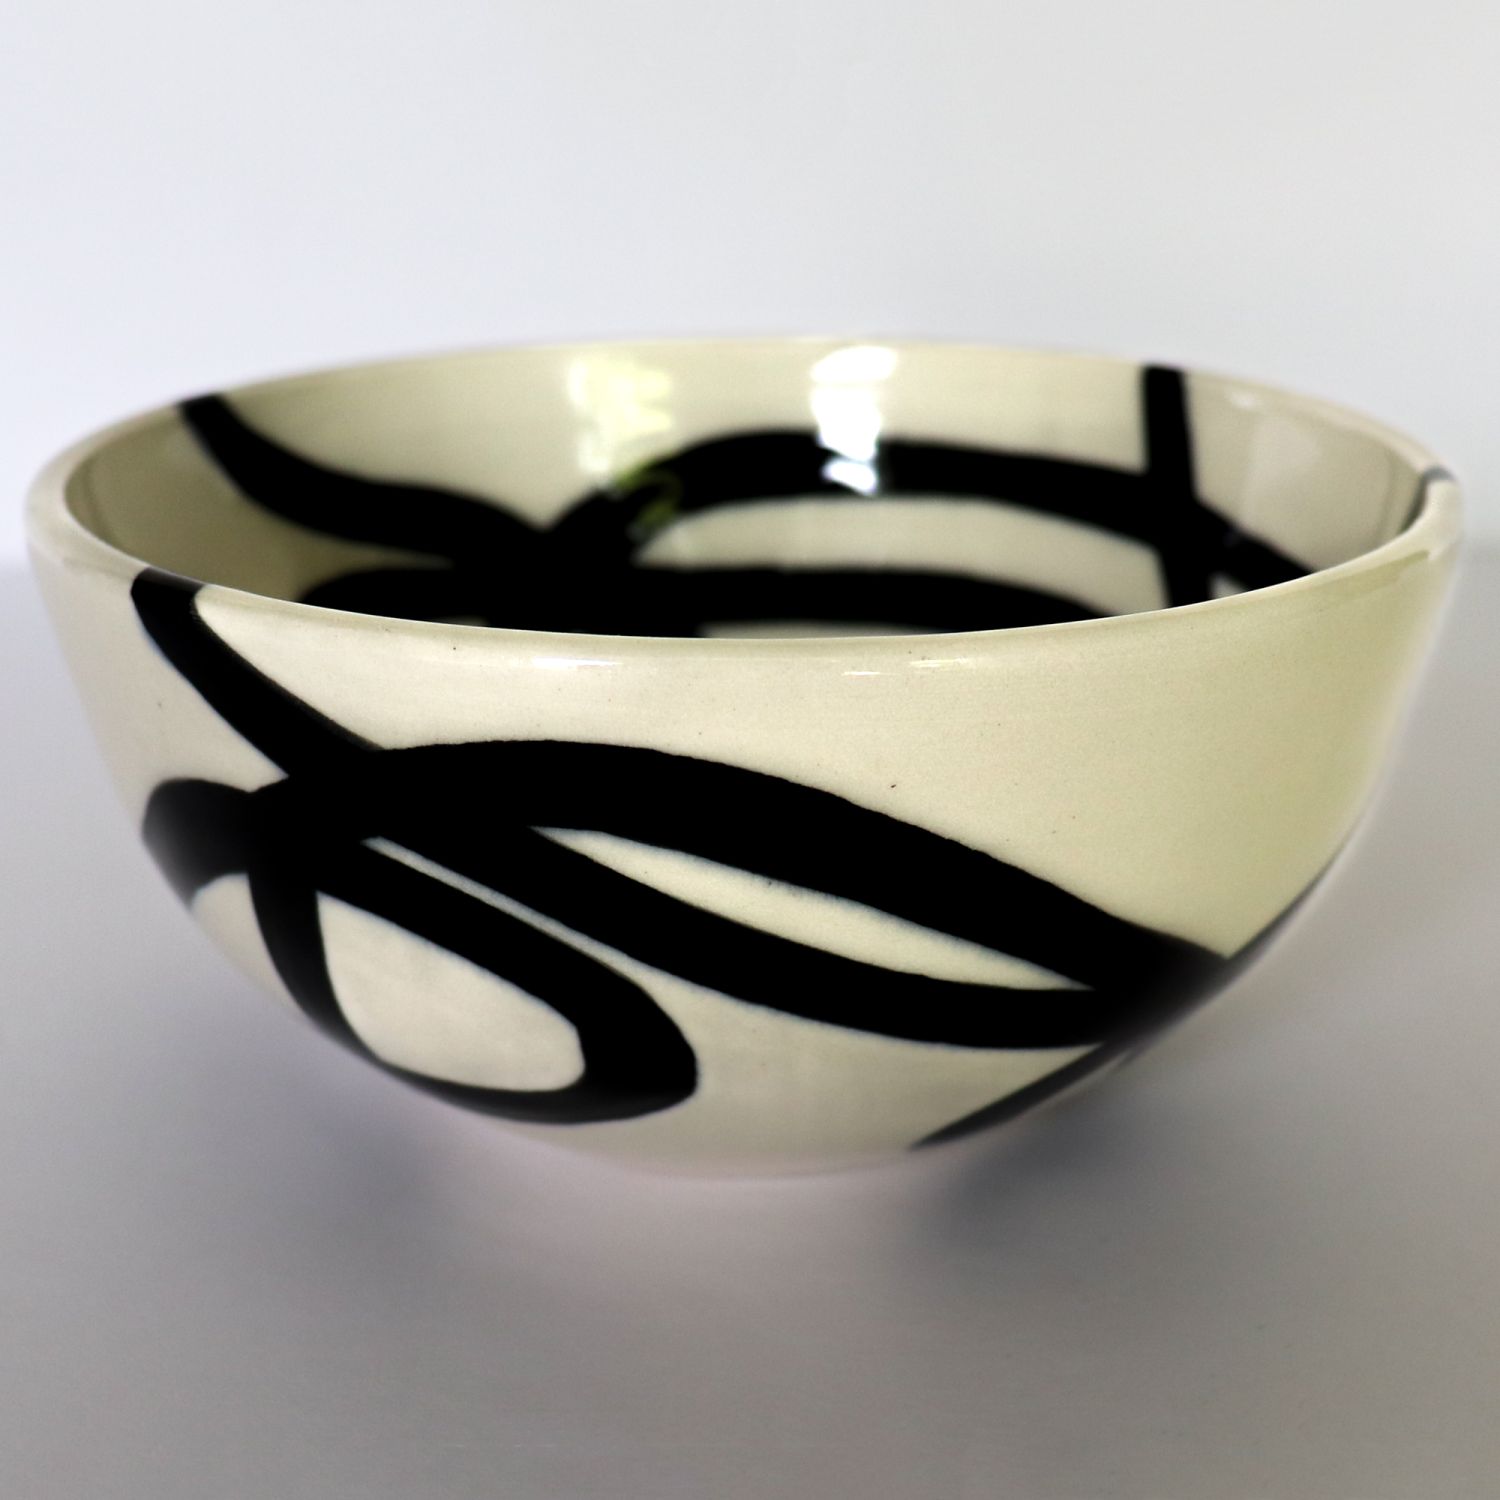 Alana Marcoccia: Interconnected Bowl – Large Product Image 5 of 5